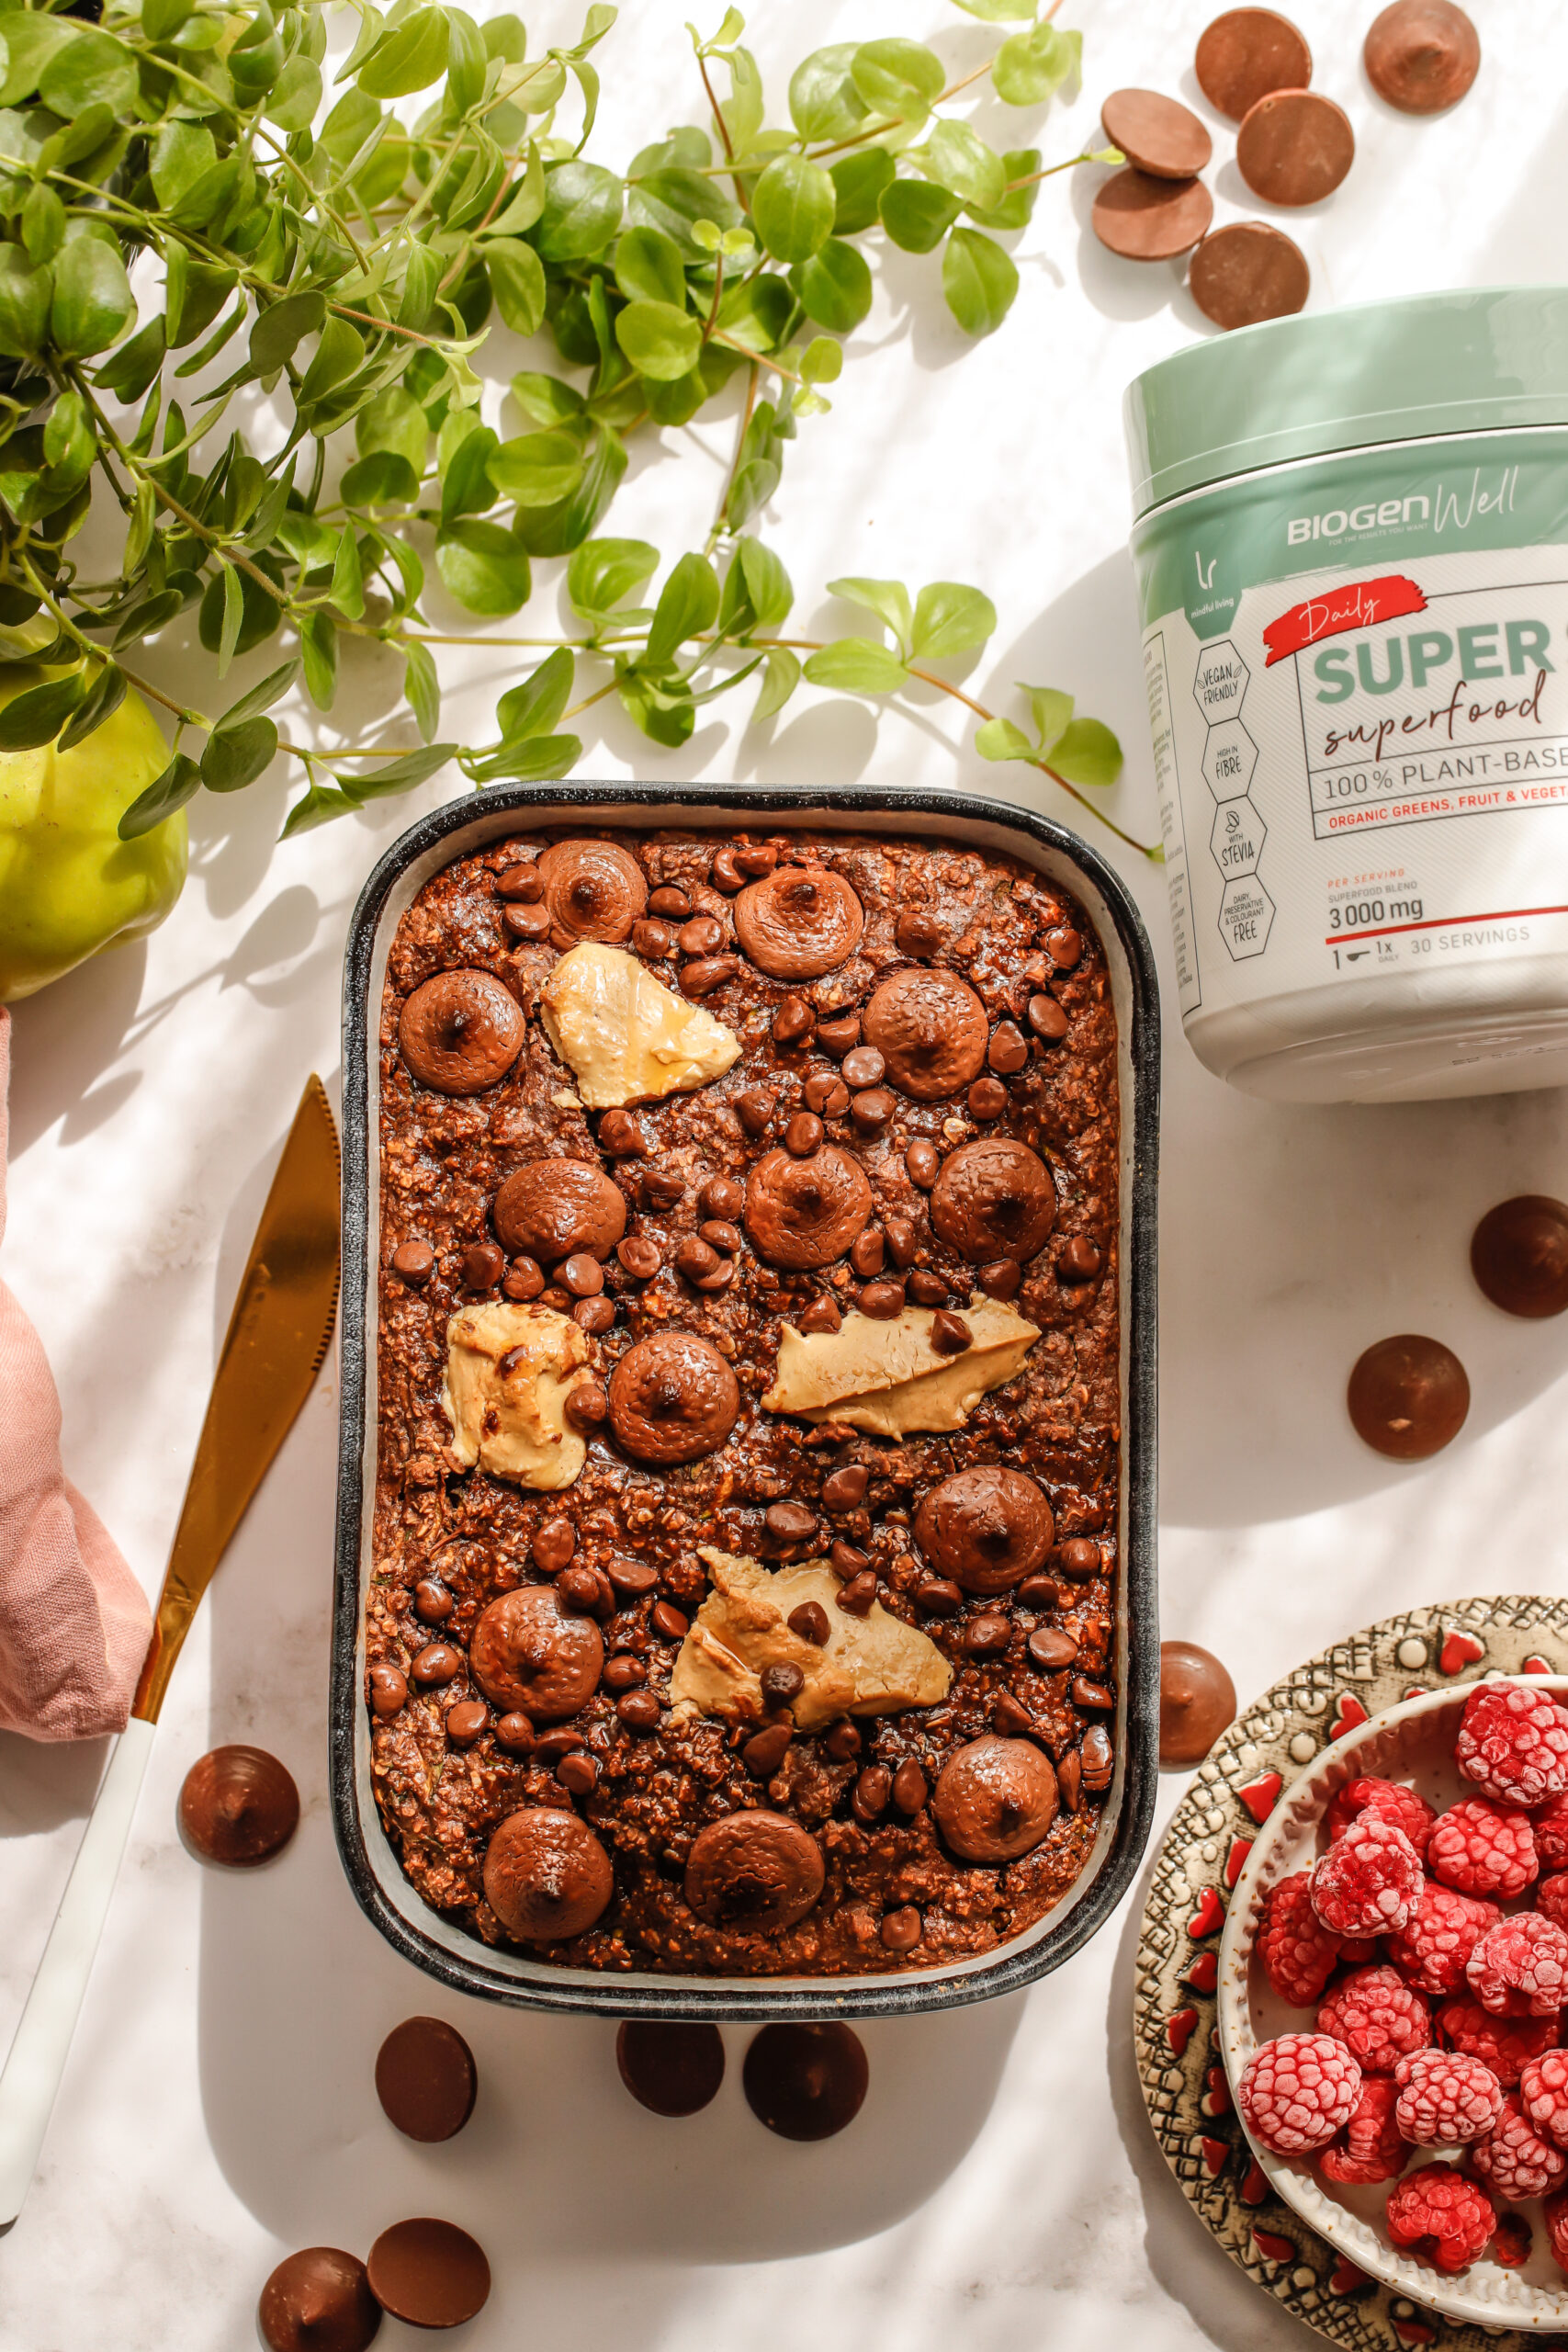 Superfood chocolate baked oats